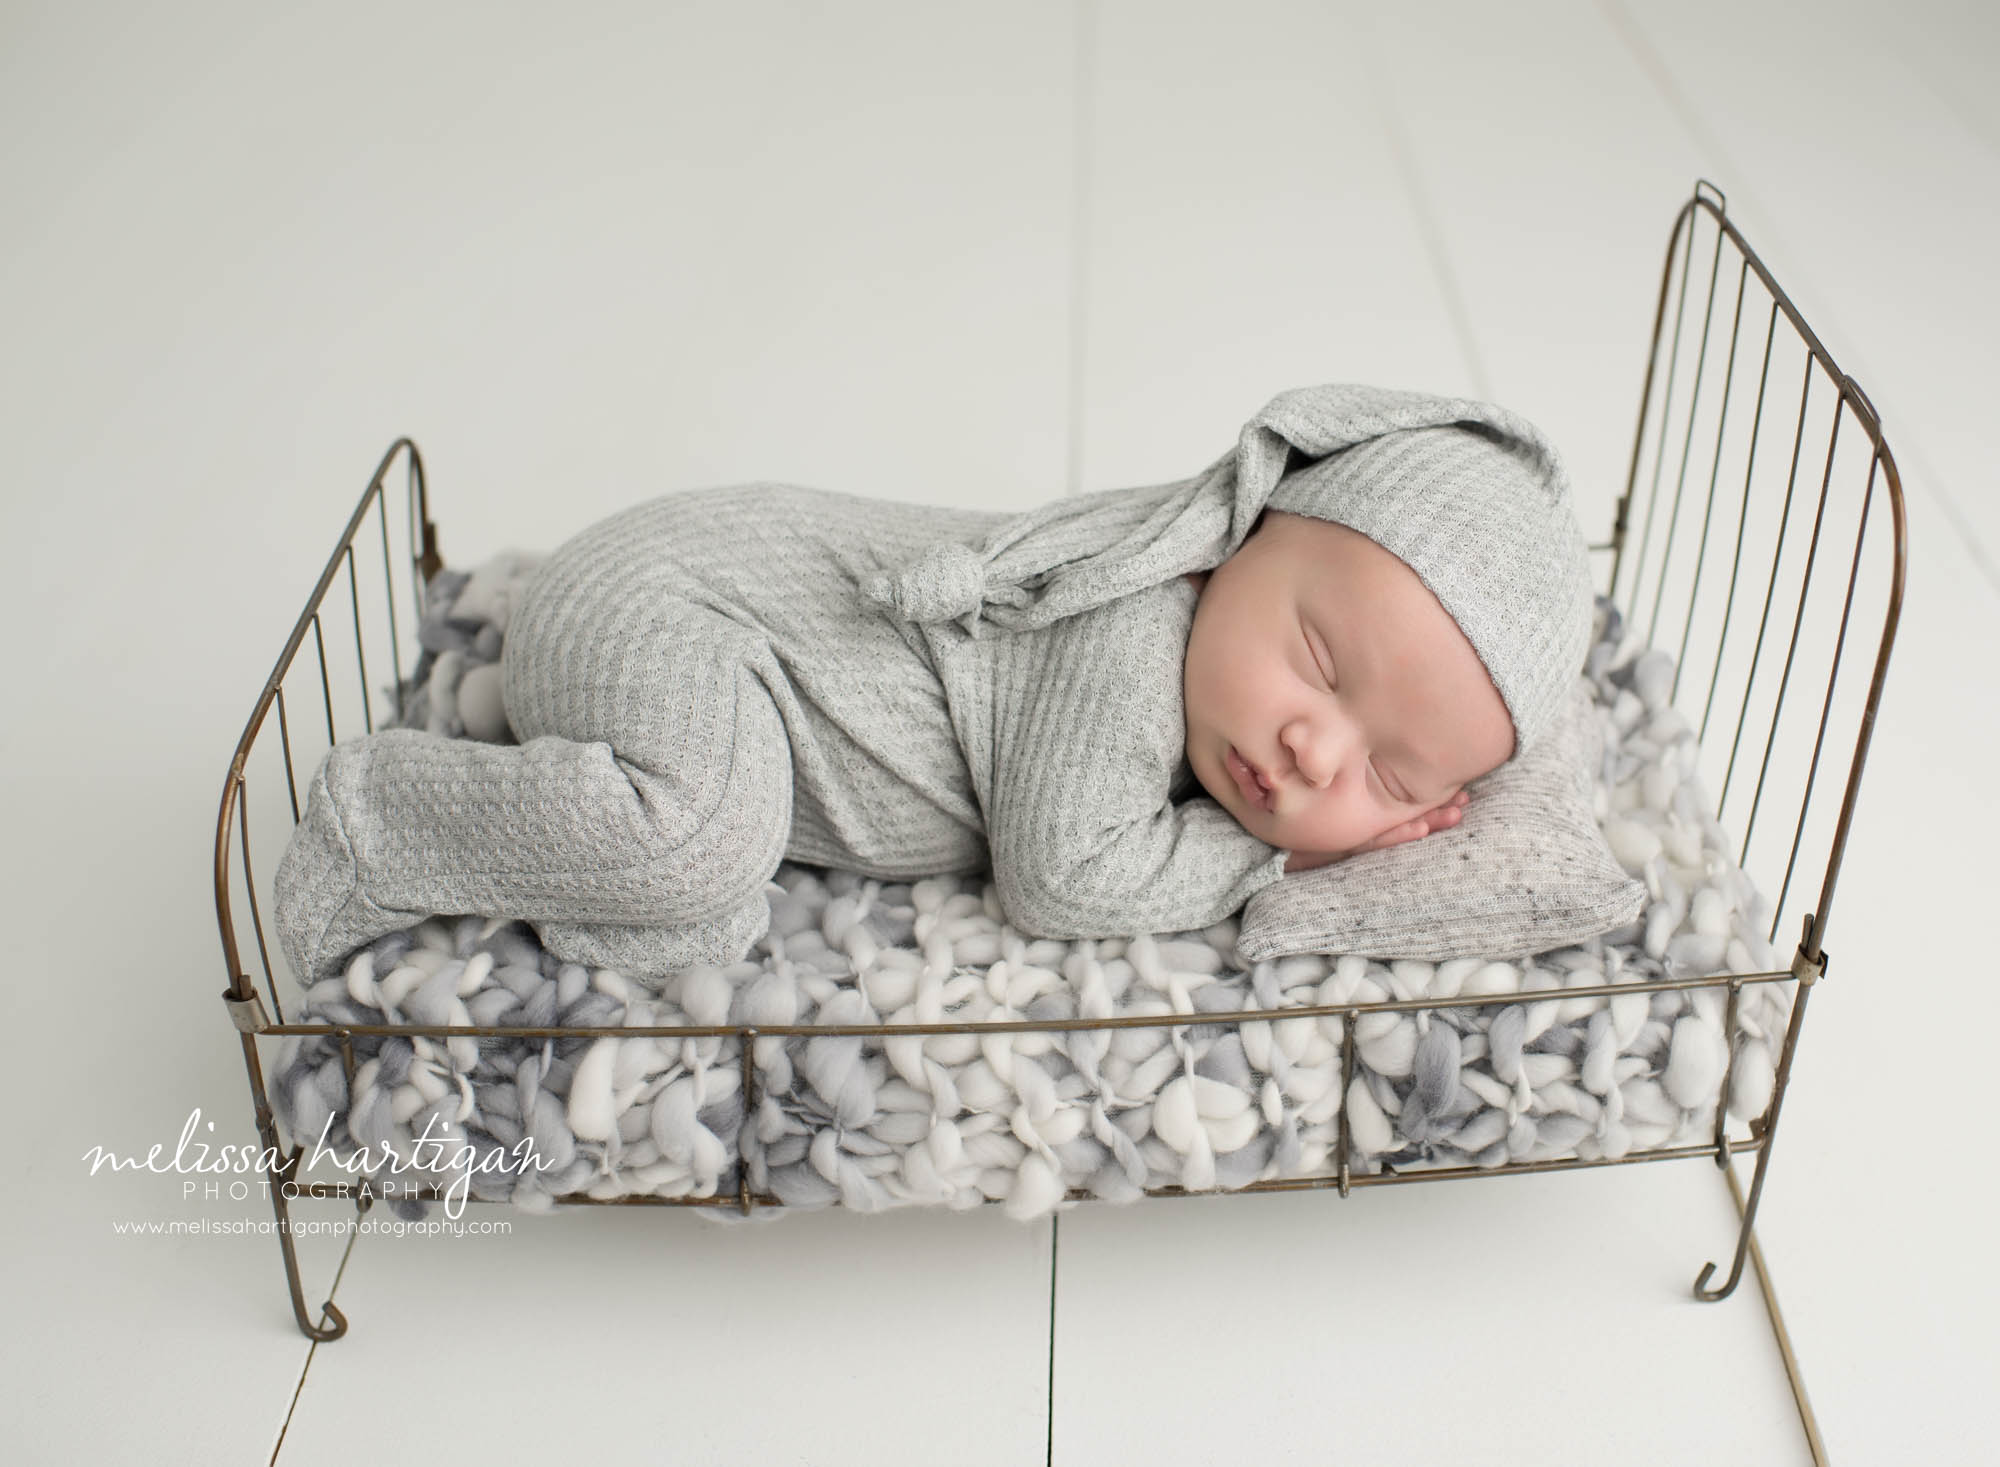 Baby boy posed on metal bed with grey knitted layer and grey outfit and hat set